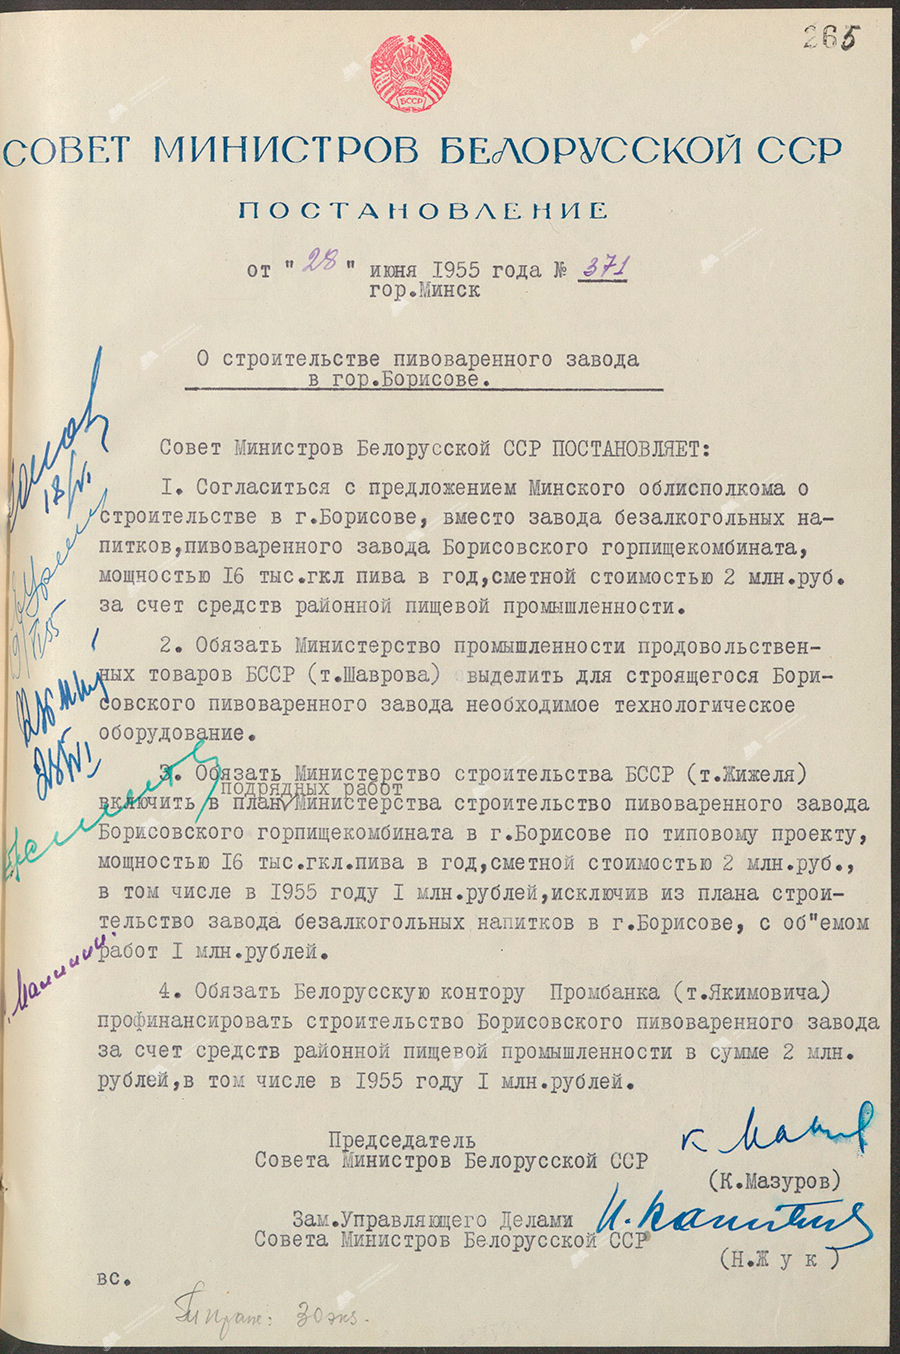 Resolution No. 371 of the Council of Ministers of the Byelorussian SSR «On the construction of a brewery in the city. Borisov»-с. 0